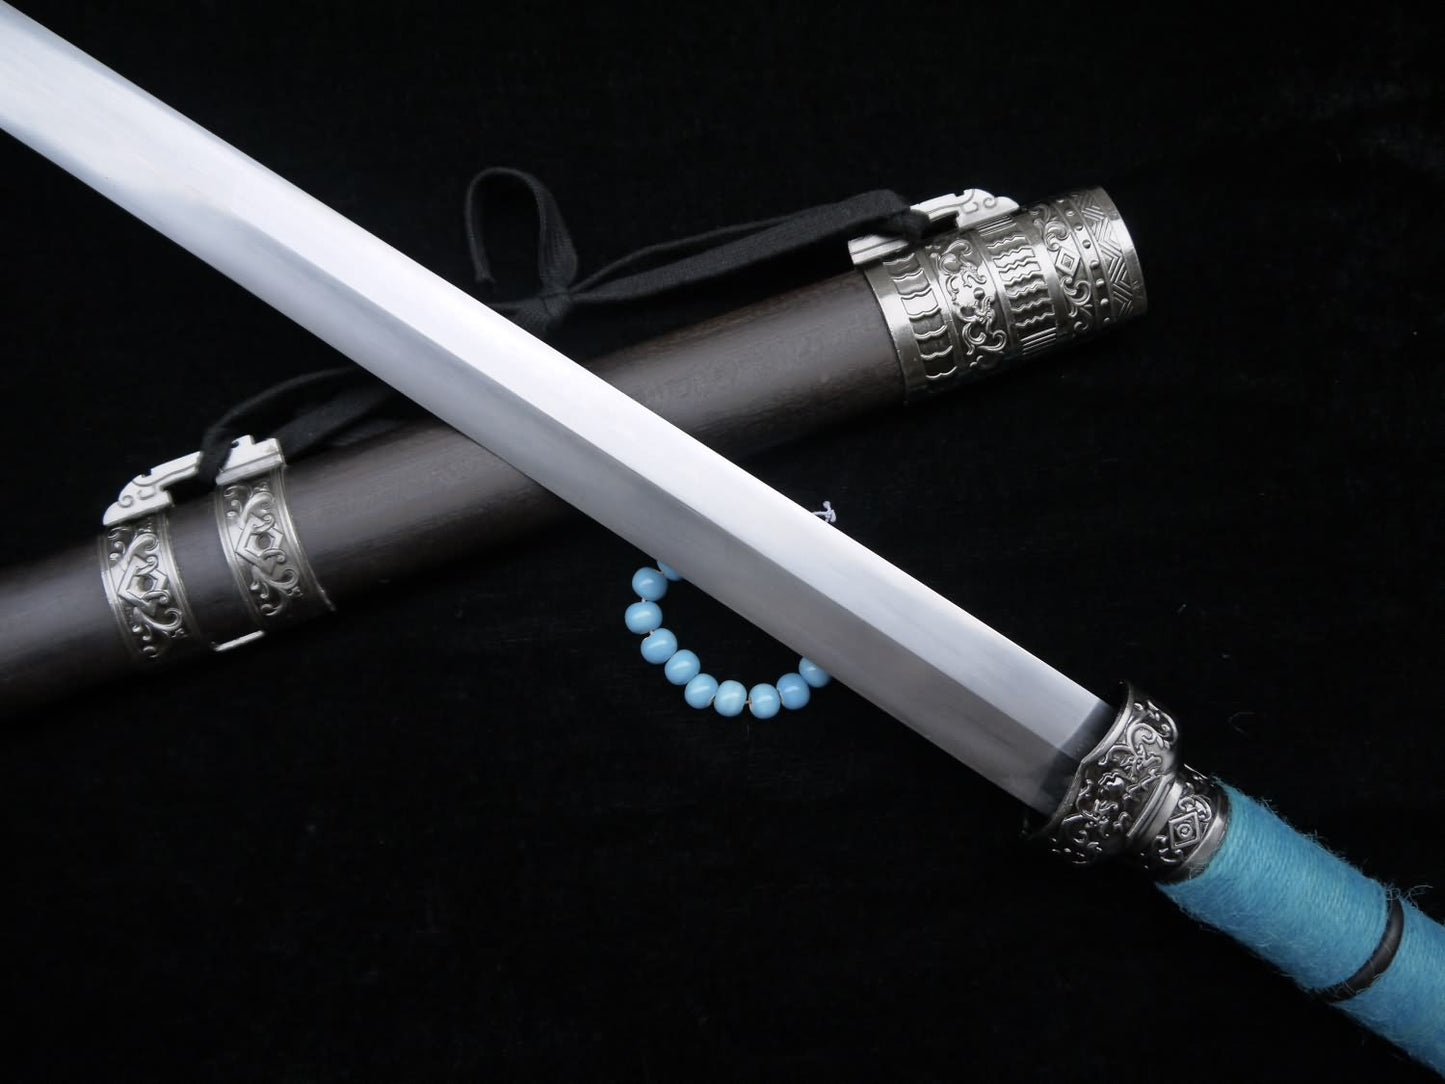 Double-bladed sword(High Manganese Steel,Black scabbard,Alloy)Length 39" - Chinese sword shop